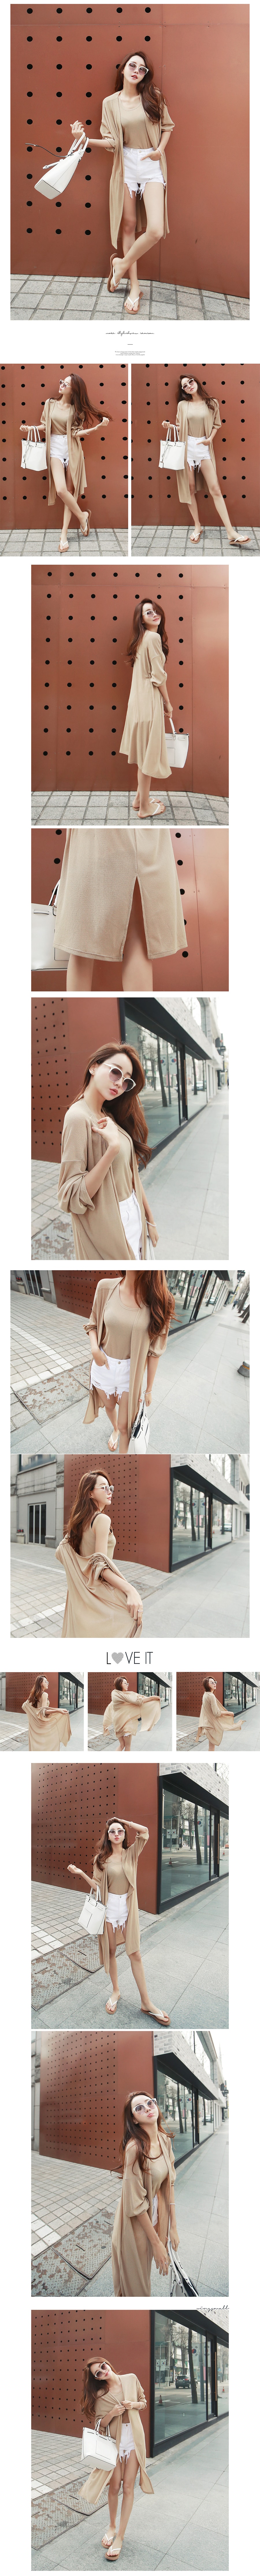 KOREA Open Front Long Cardigan+Tank Top 2 Pieces #Beige One Size(S-M) [Free Shipping]